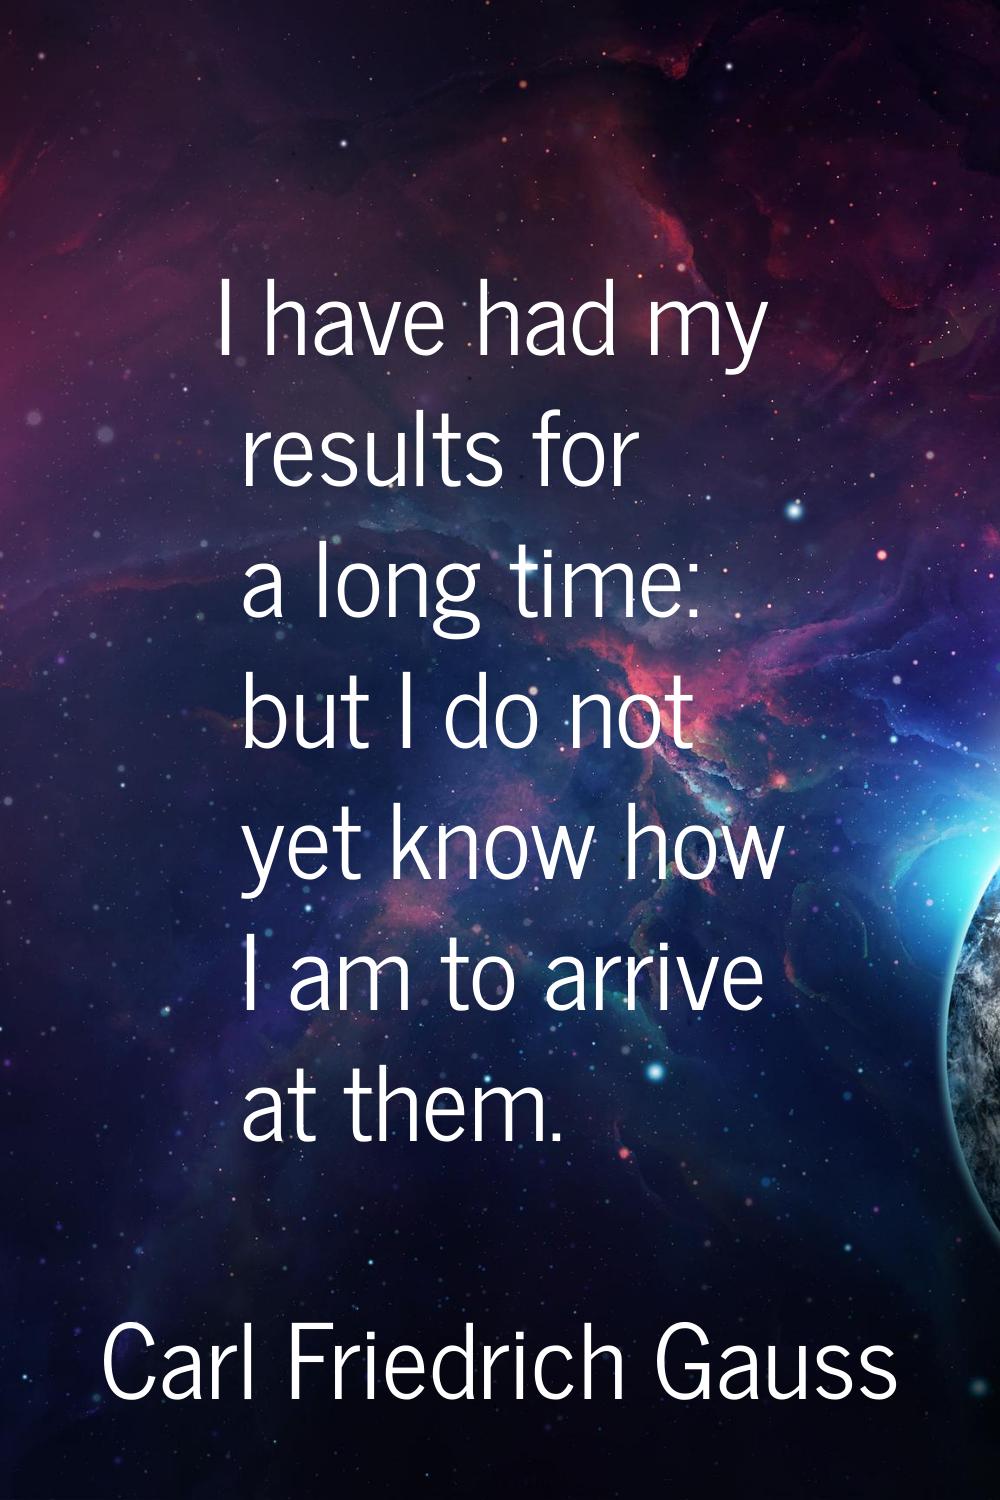 I have had my results for a long time: but I do not yet know how I am to arrive at them.